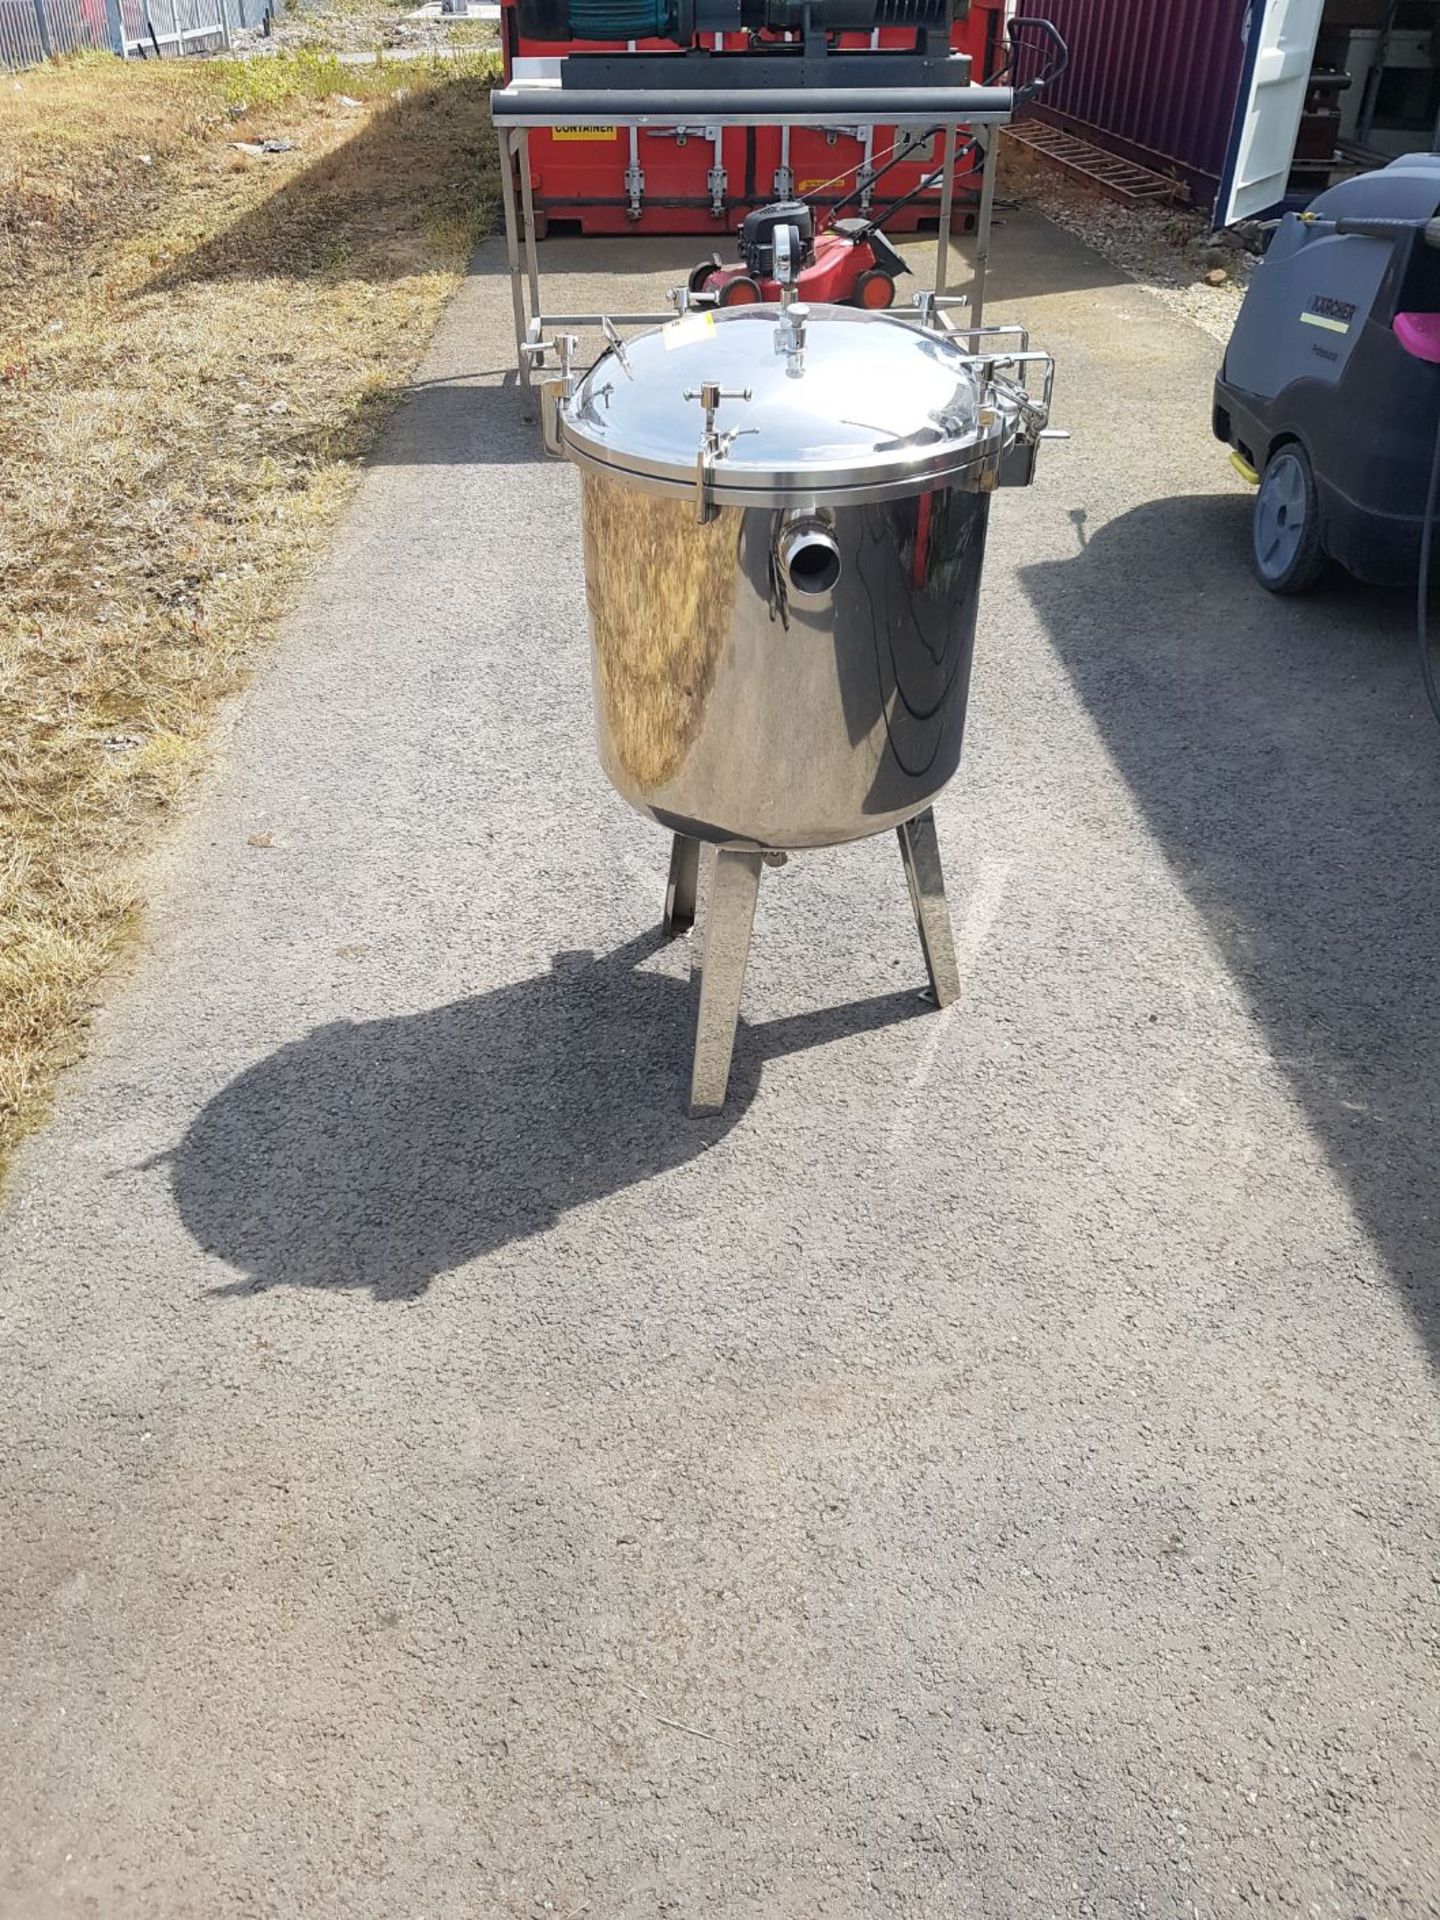 1 x brand new resim impregnation stainless steel tank vacuum tank with basket filter support - Image 8 of 10